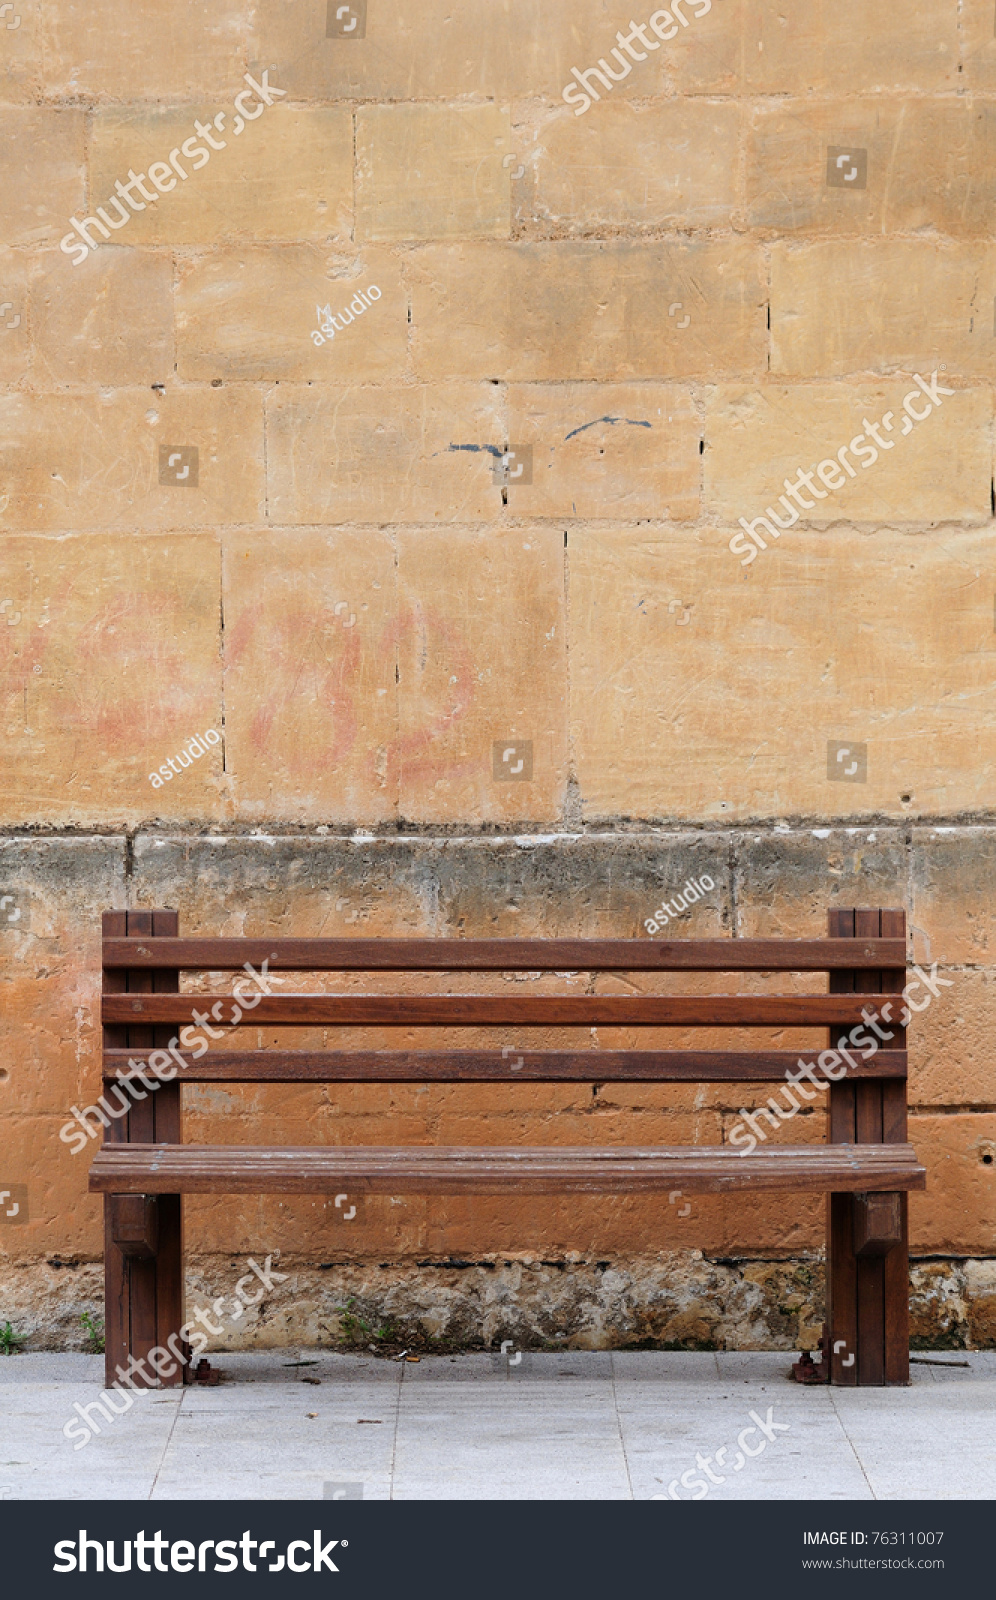 Wood Bench Against A Brick Wall Stock Photo 76311007 